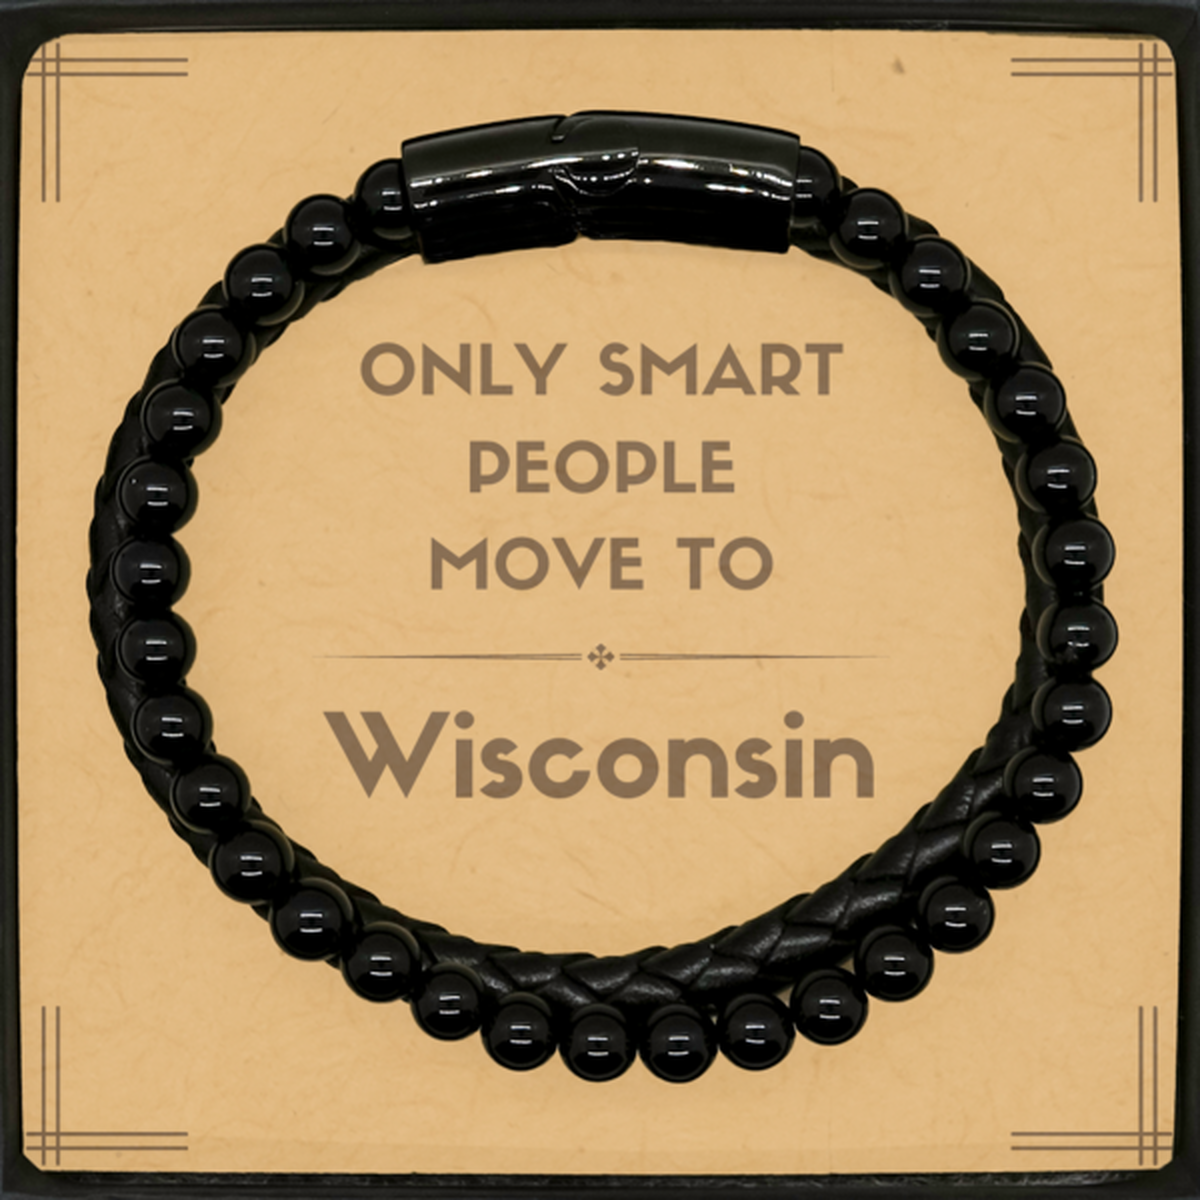 Only smart people move to Wisconsin Stone Leather Bracelets, Message Card Gifts For Wisconsin, Move to Wisconsin Gifts for Friends Coworker Funny Saying Quote